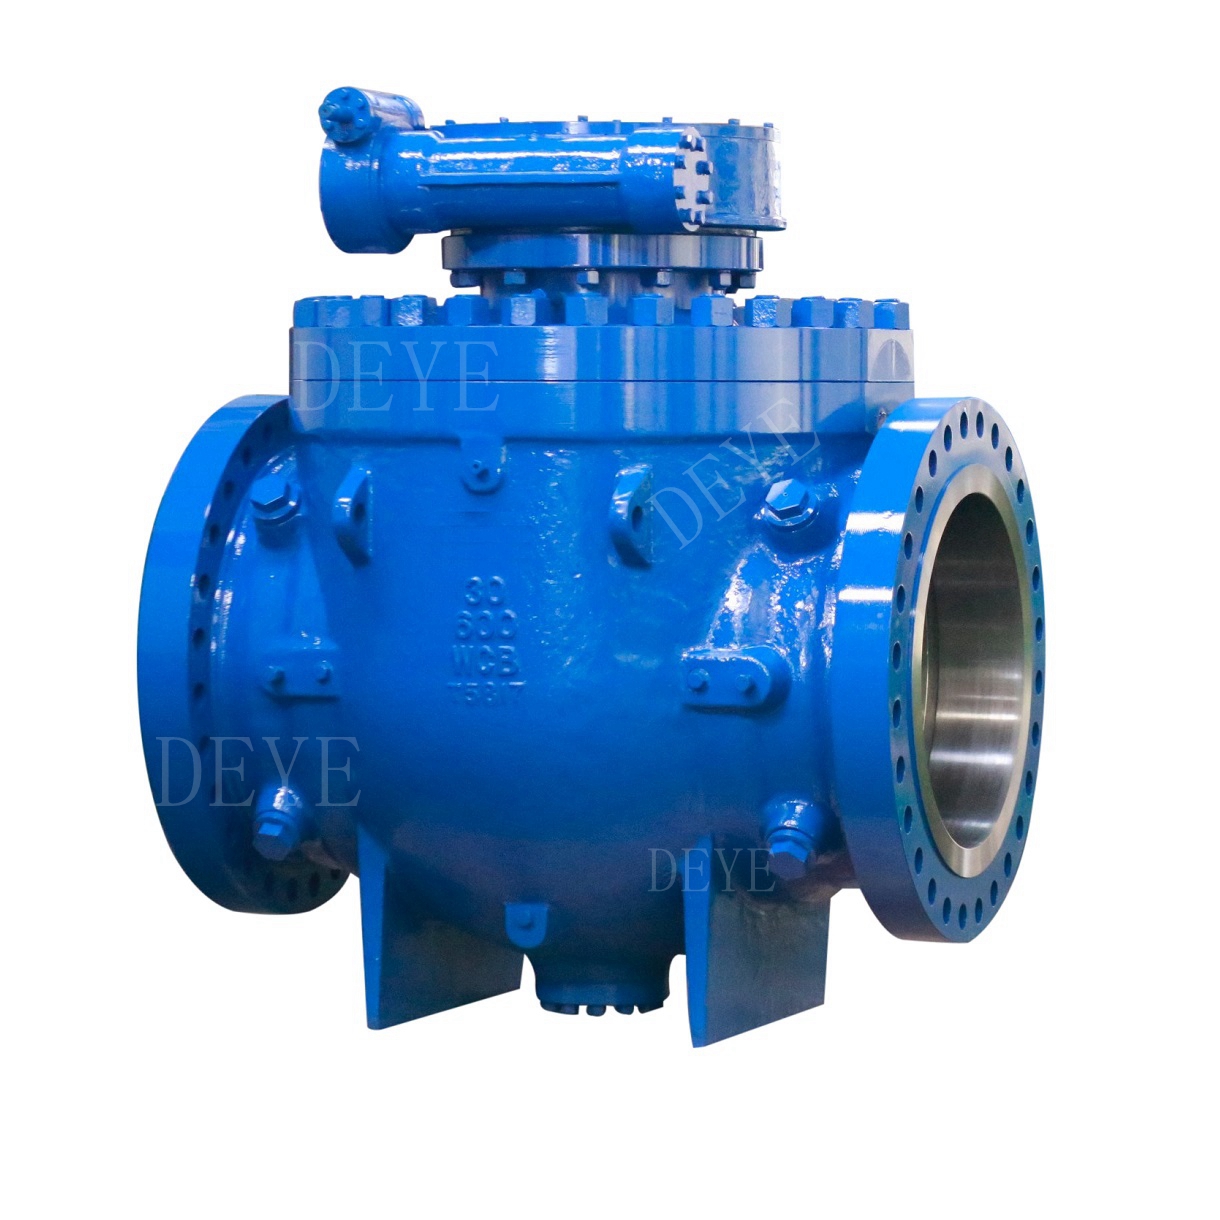 Reasonable price 150# Forged Gate Valve -
 DN750 30INCH flanged trunnion mounted top entry ball valve ( BV-600-30F) – Deye